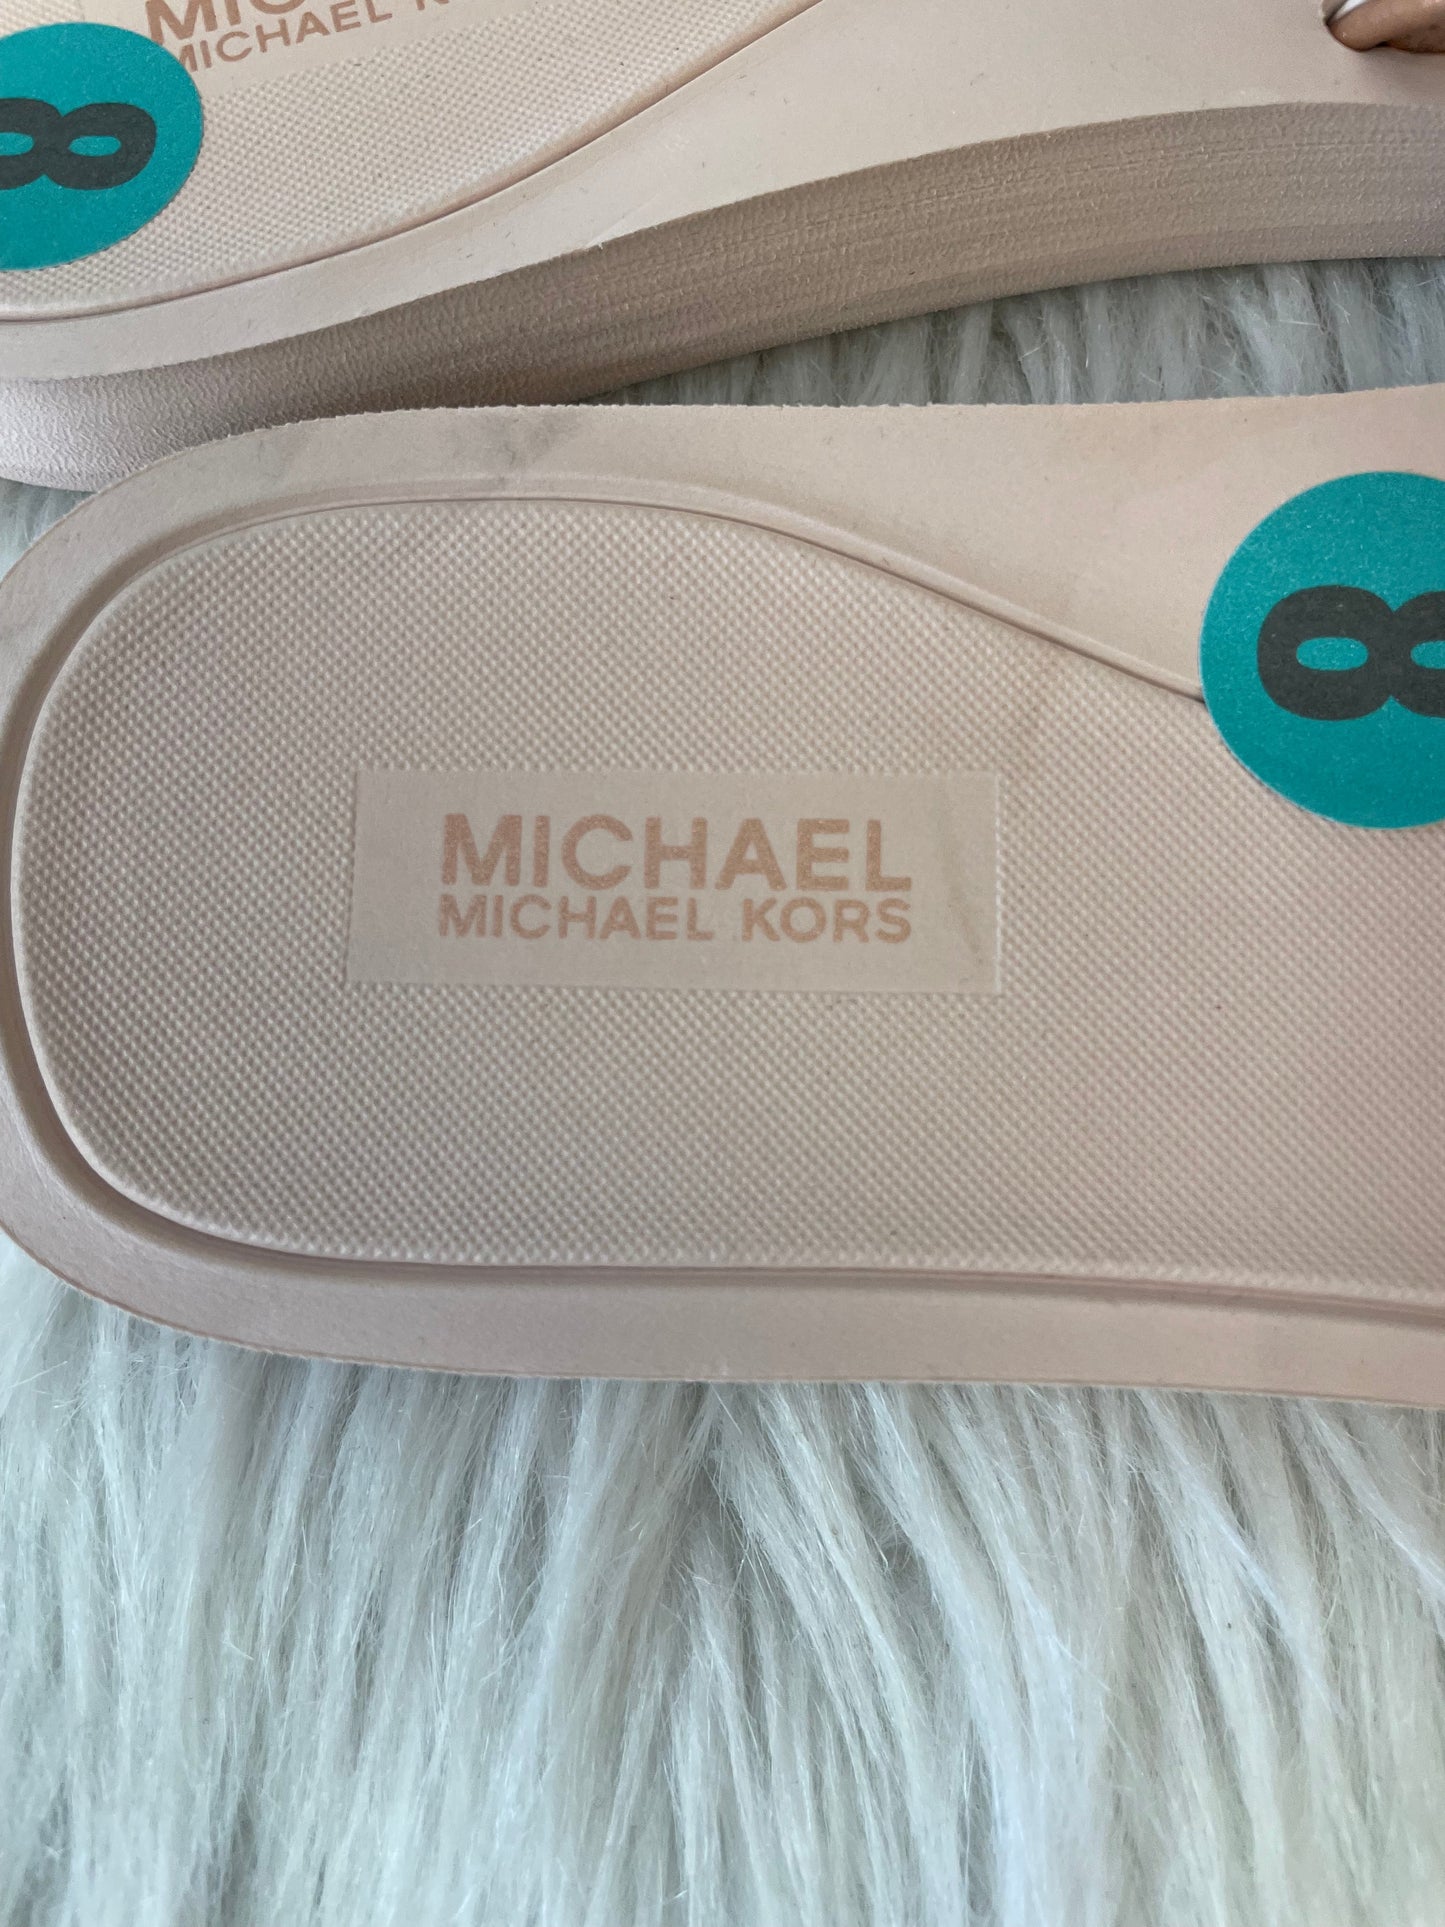 Sandals Designer By Michael By Michael Kors  Size: 8